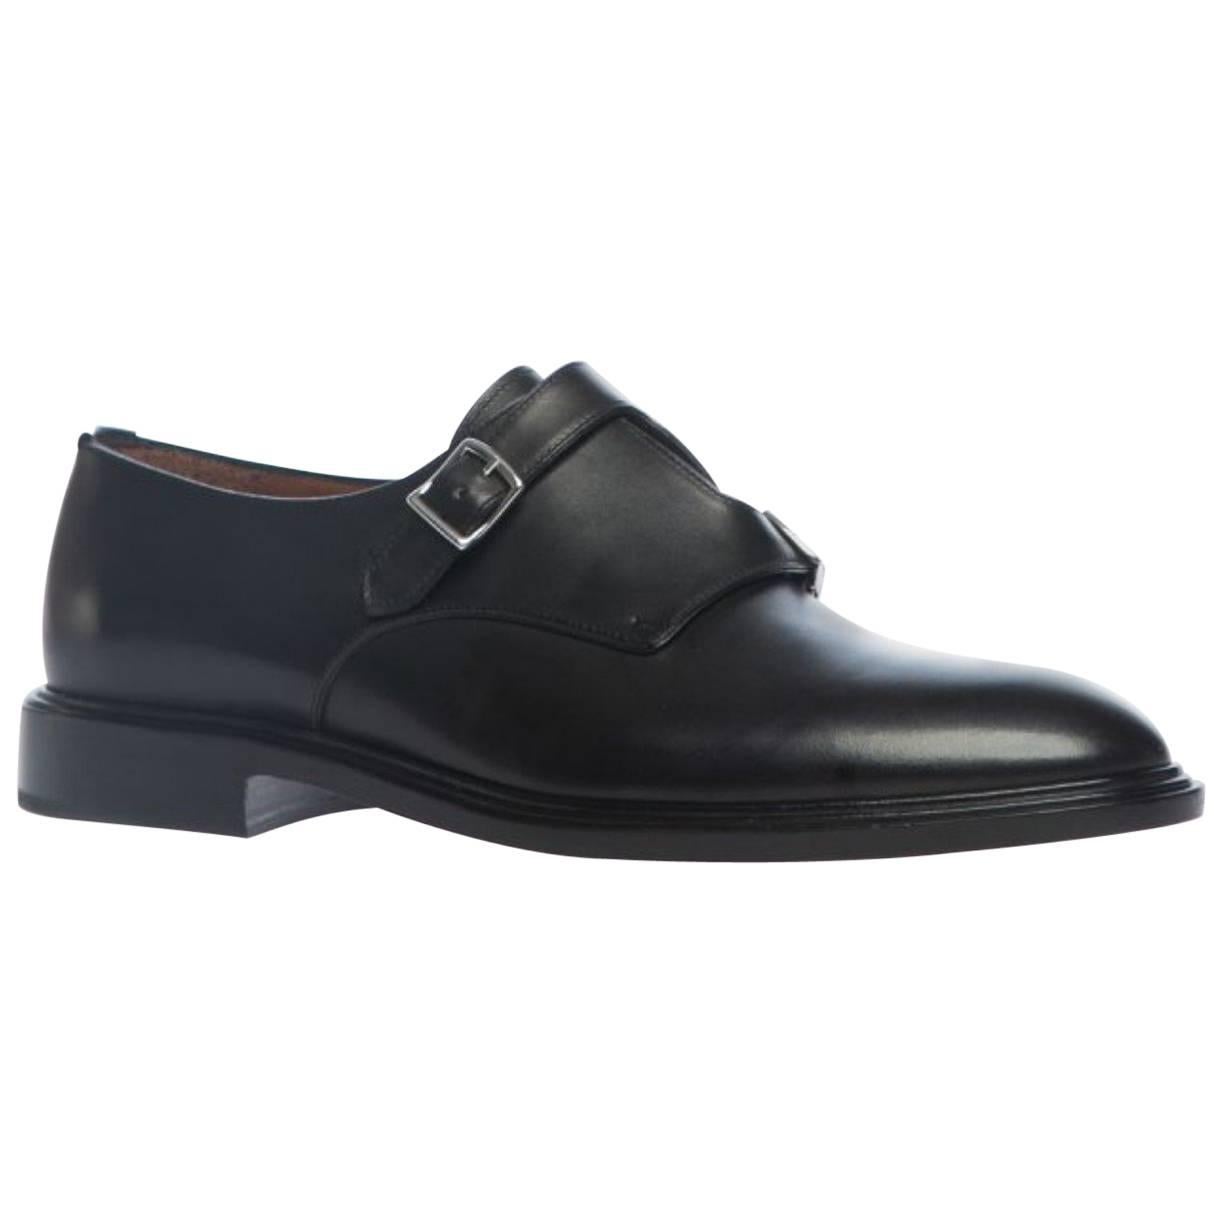 Givenchy Double Buckle Monk Strap Shoes (Size - 42) For Sale